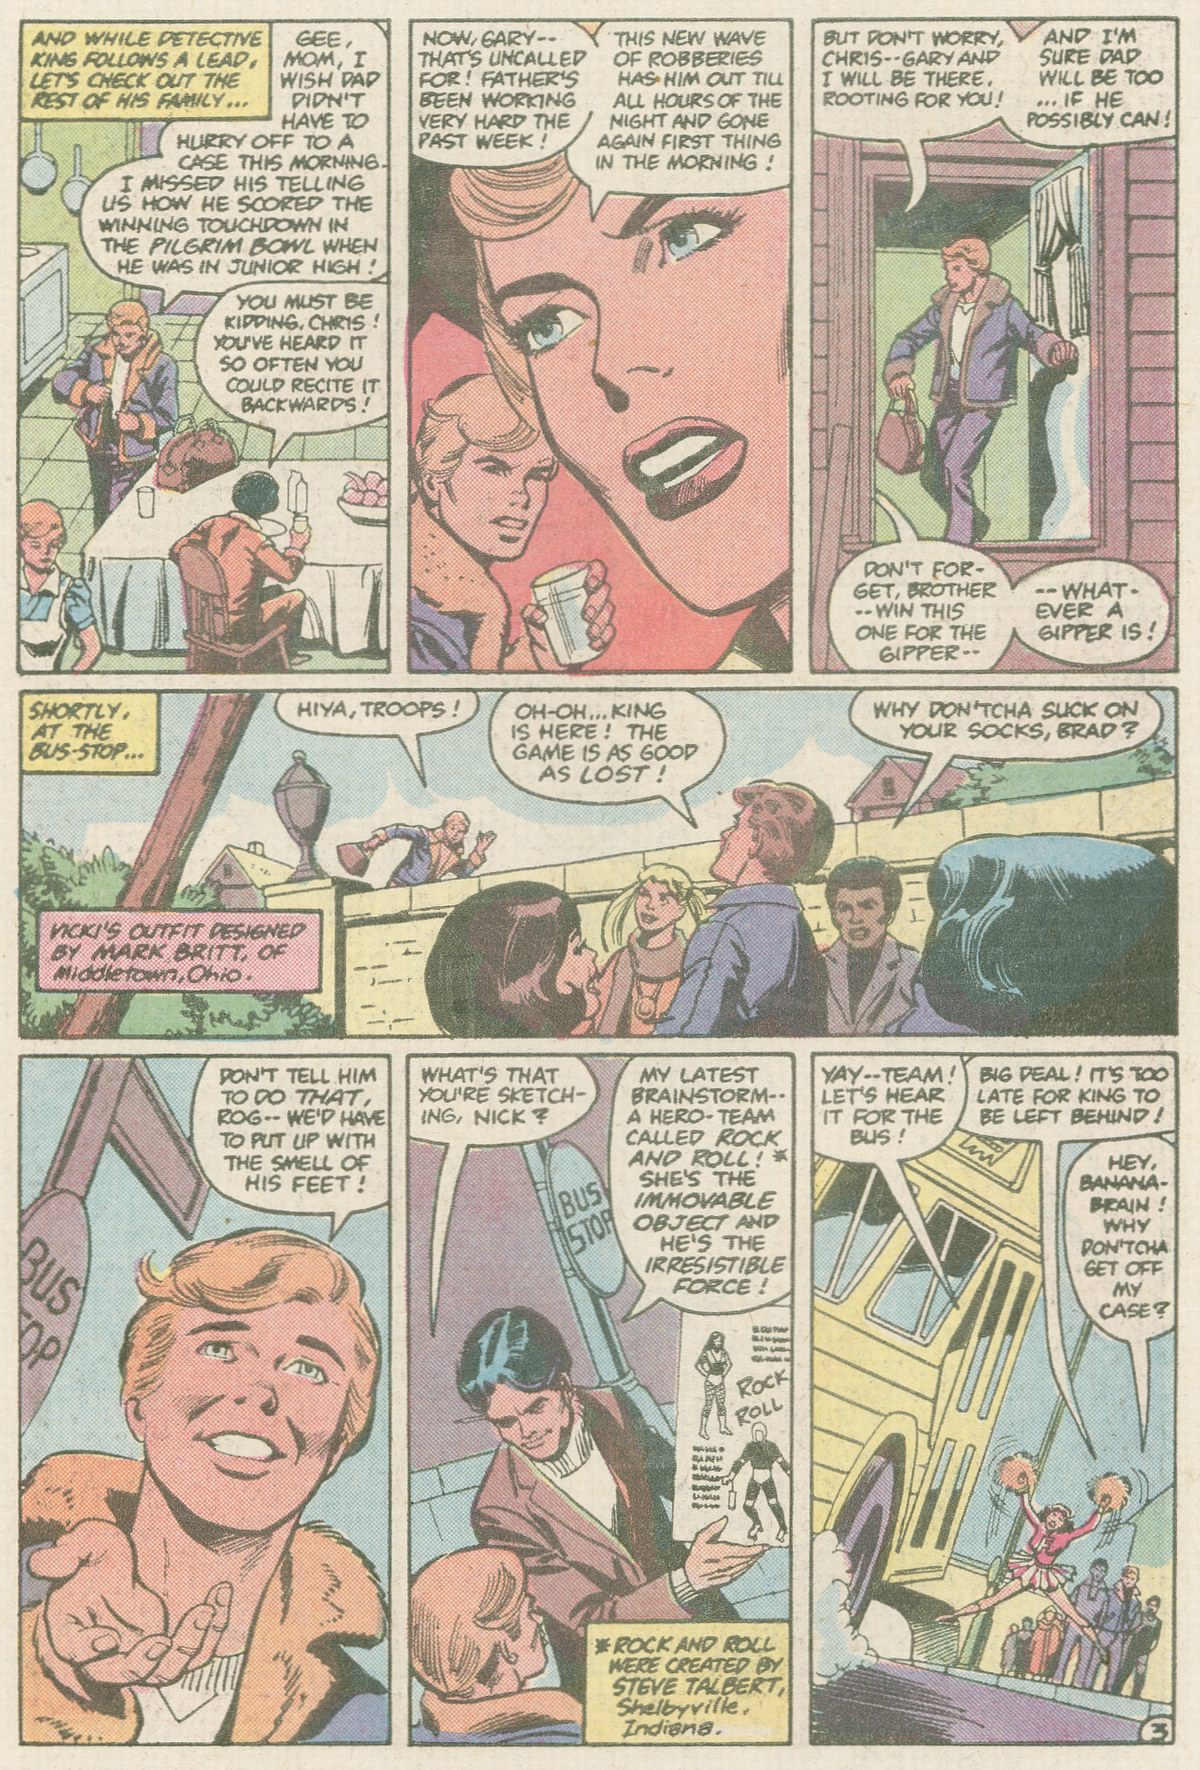 The New Adventures of Superboy 39 Page 20